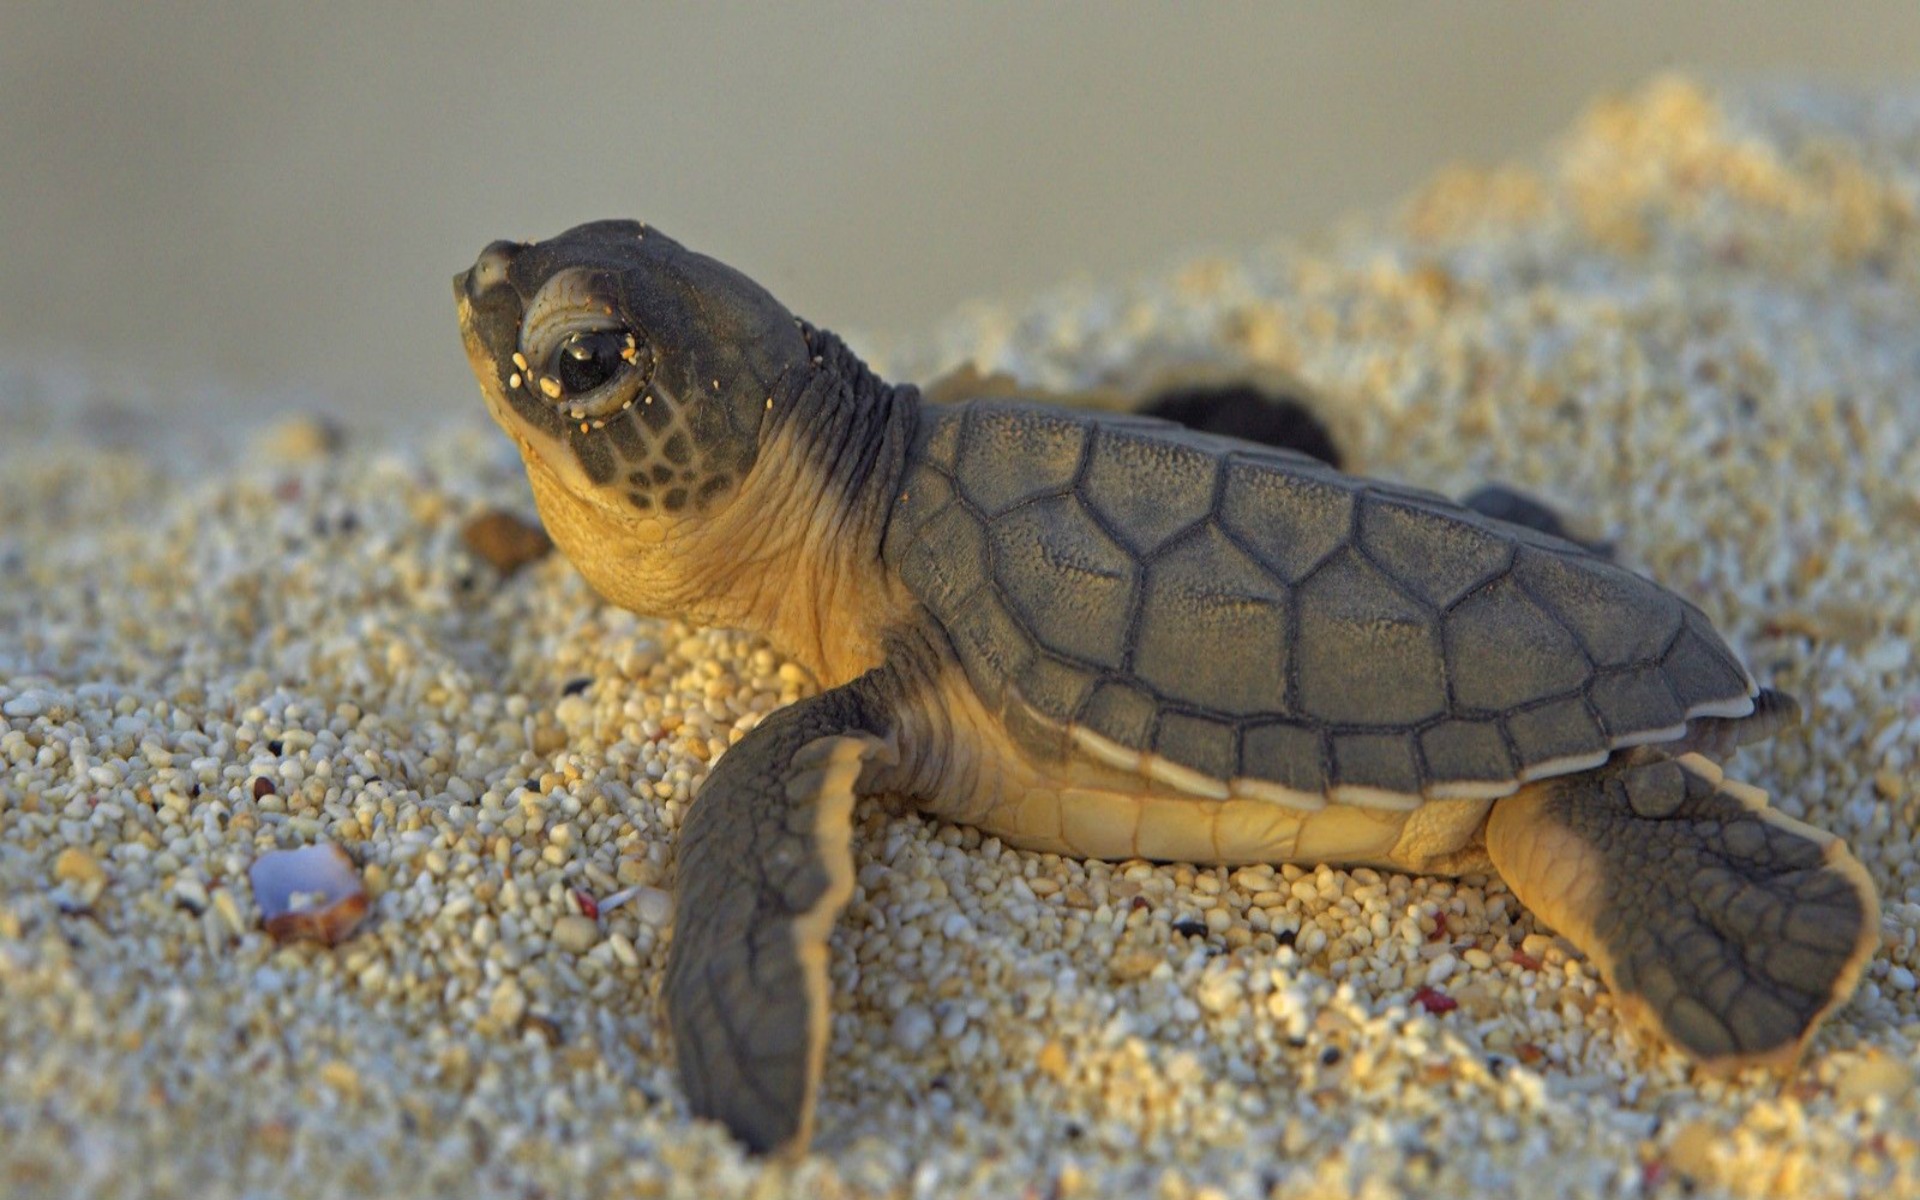 DOWNLOAD: cute turtle cub free picture 2560 x 1600